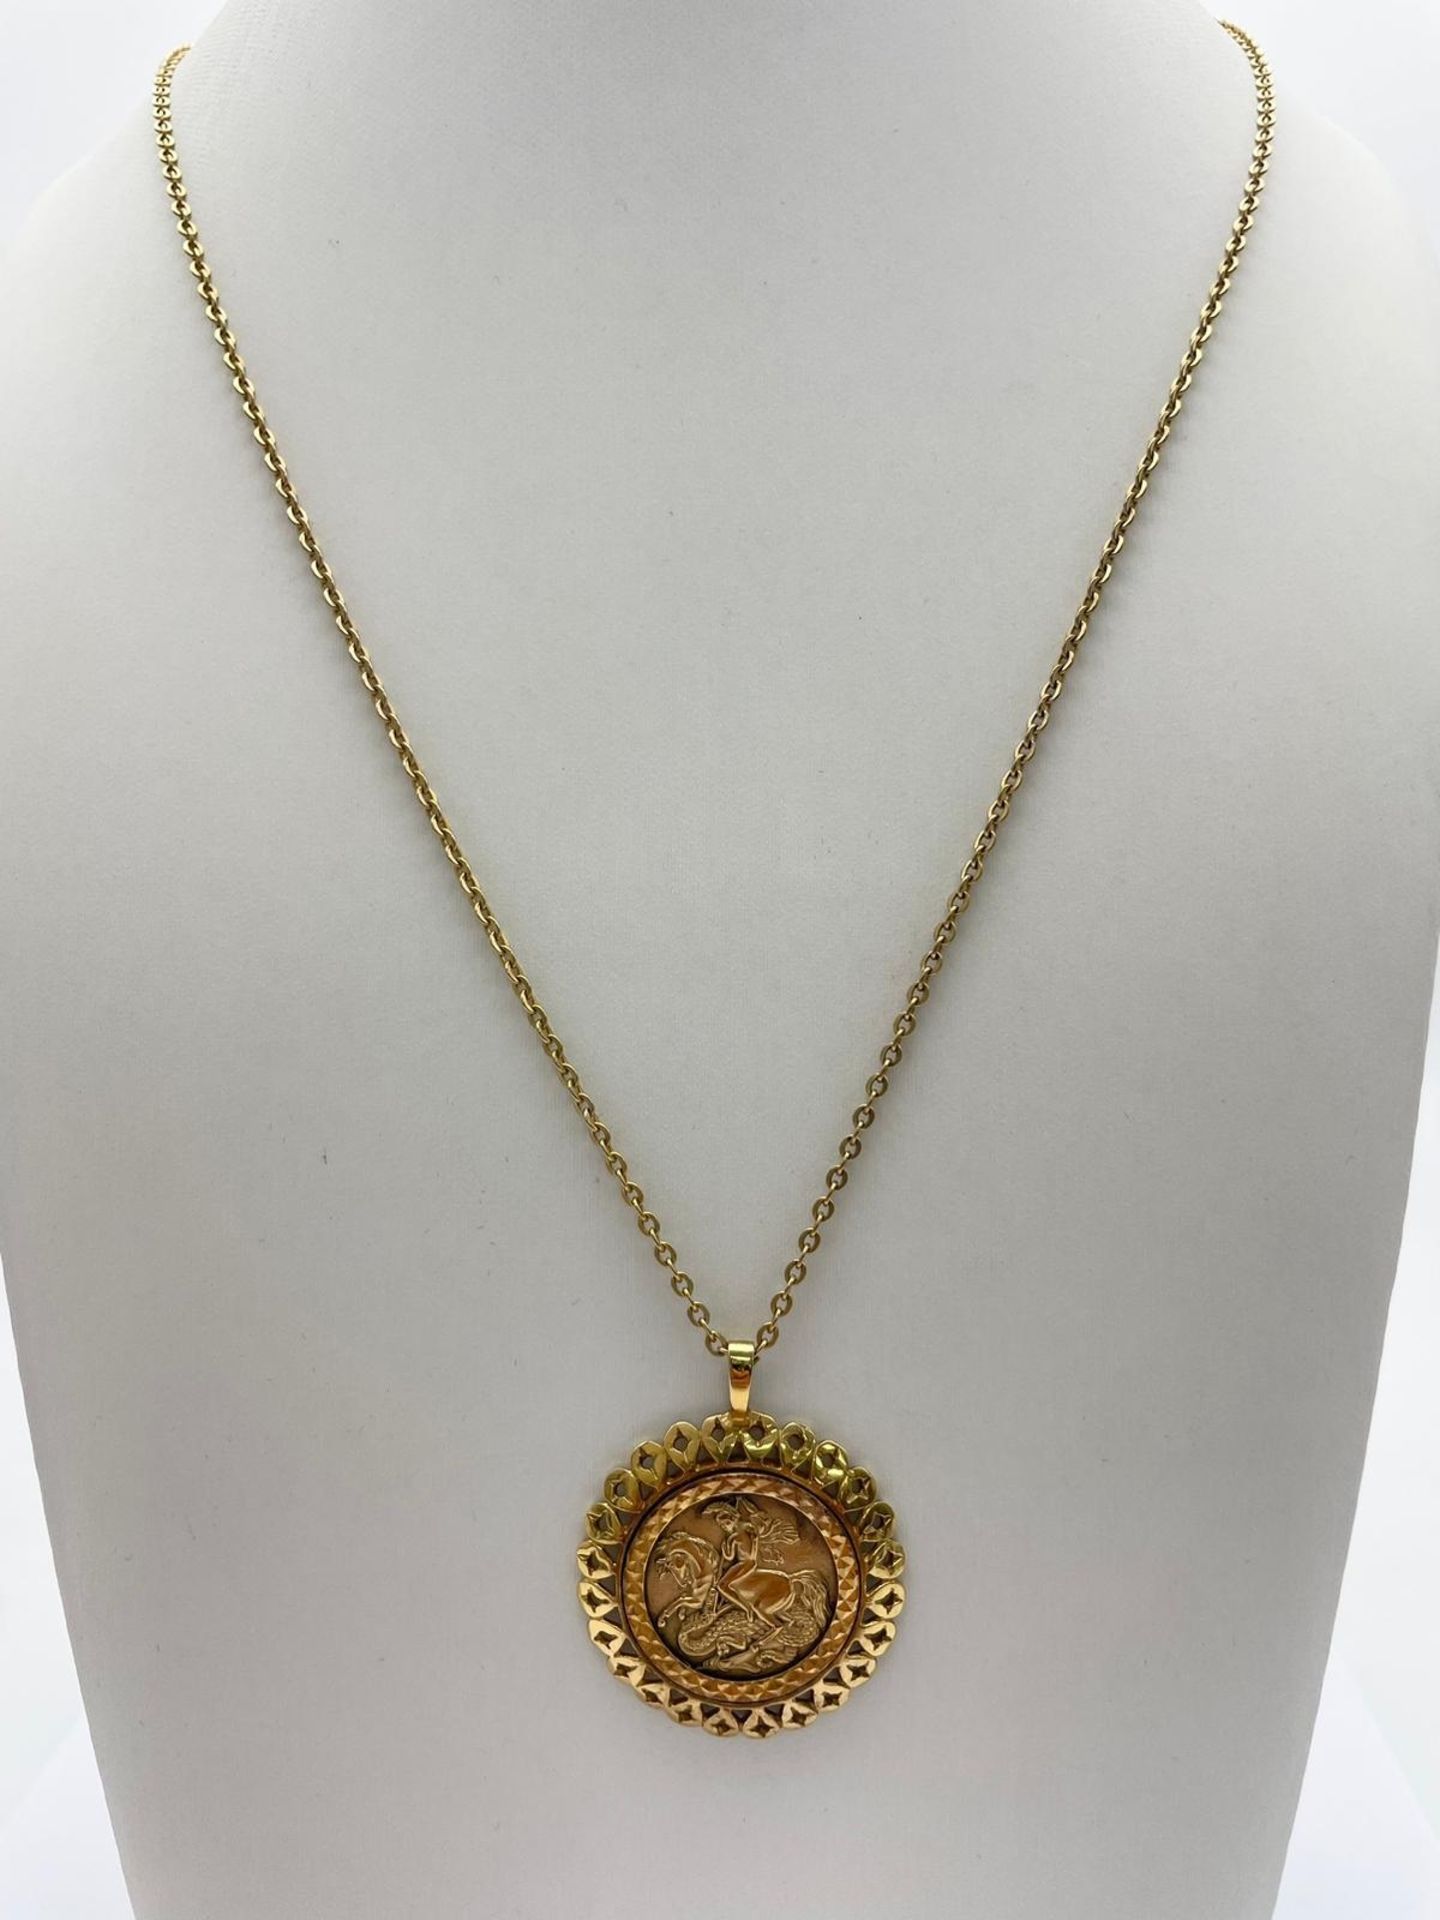 A Vintage 9K Gold Dragon Slaying Pendant on a 9K Yellow Gold Link Necklace/Chain. 27mm diameter - - Bild 2 aus 5